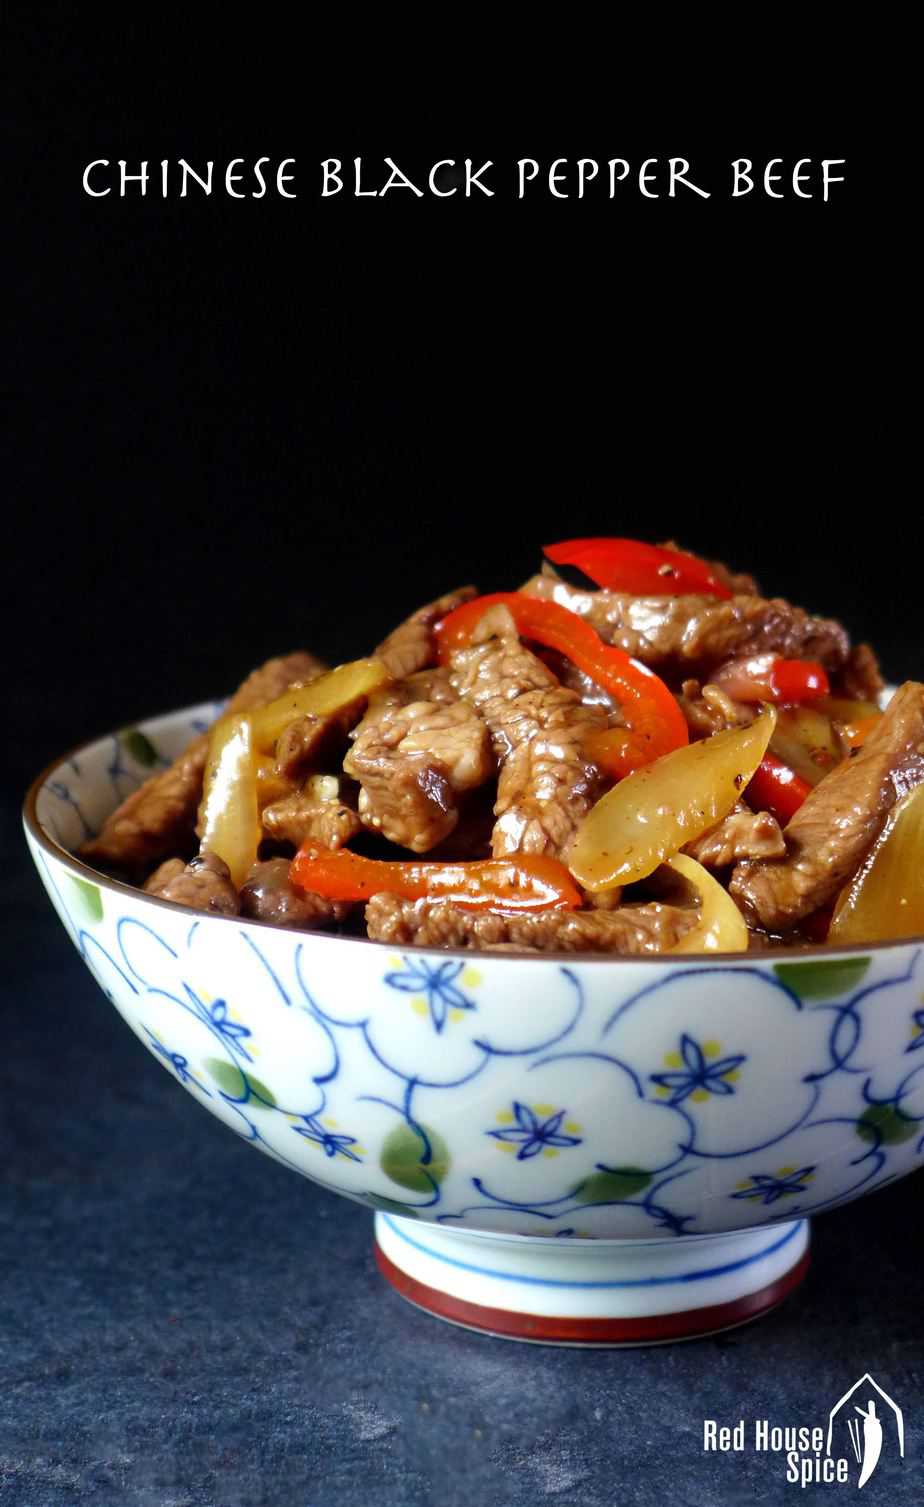 Tender and succulent beef strips with a black pepper flavoured sauce, Chinese black pepper beef stir-fry can be made at home to a restaurant standard.